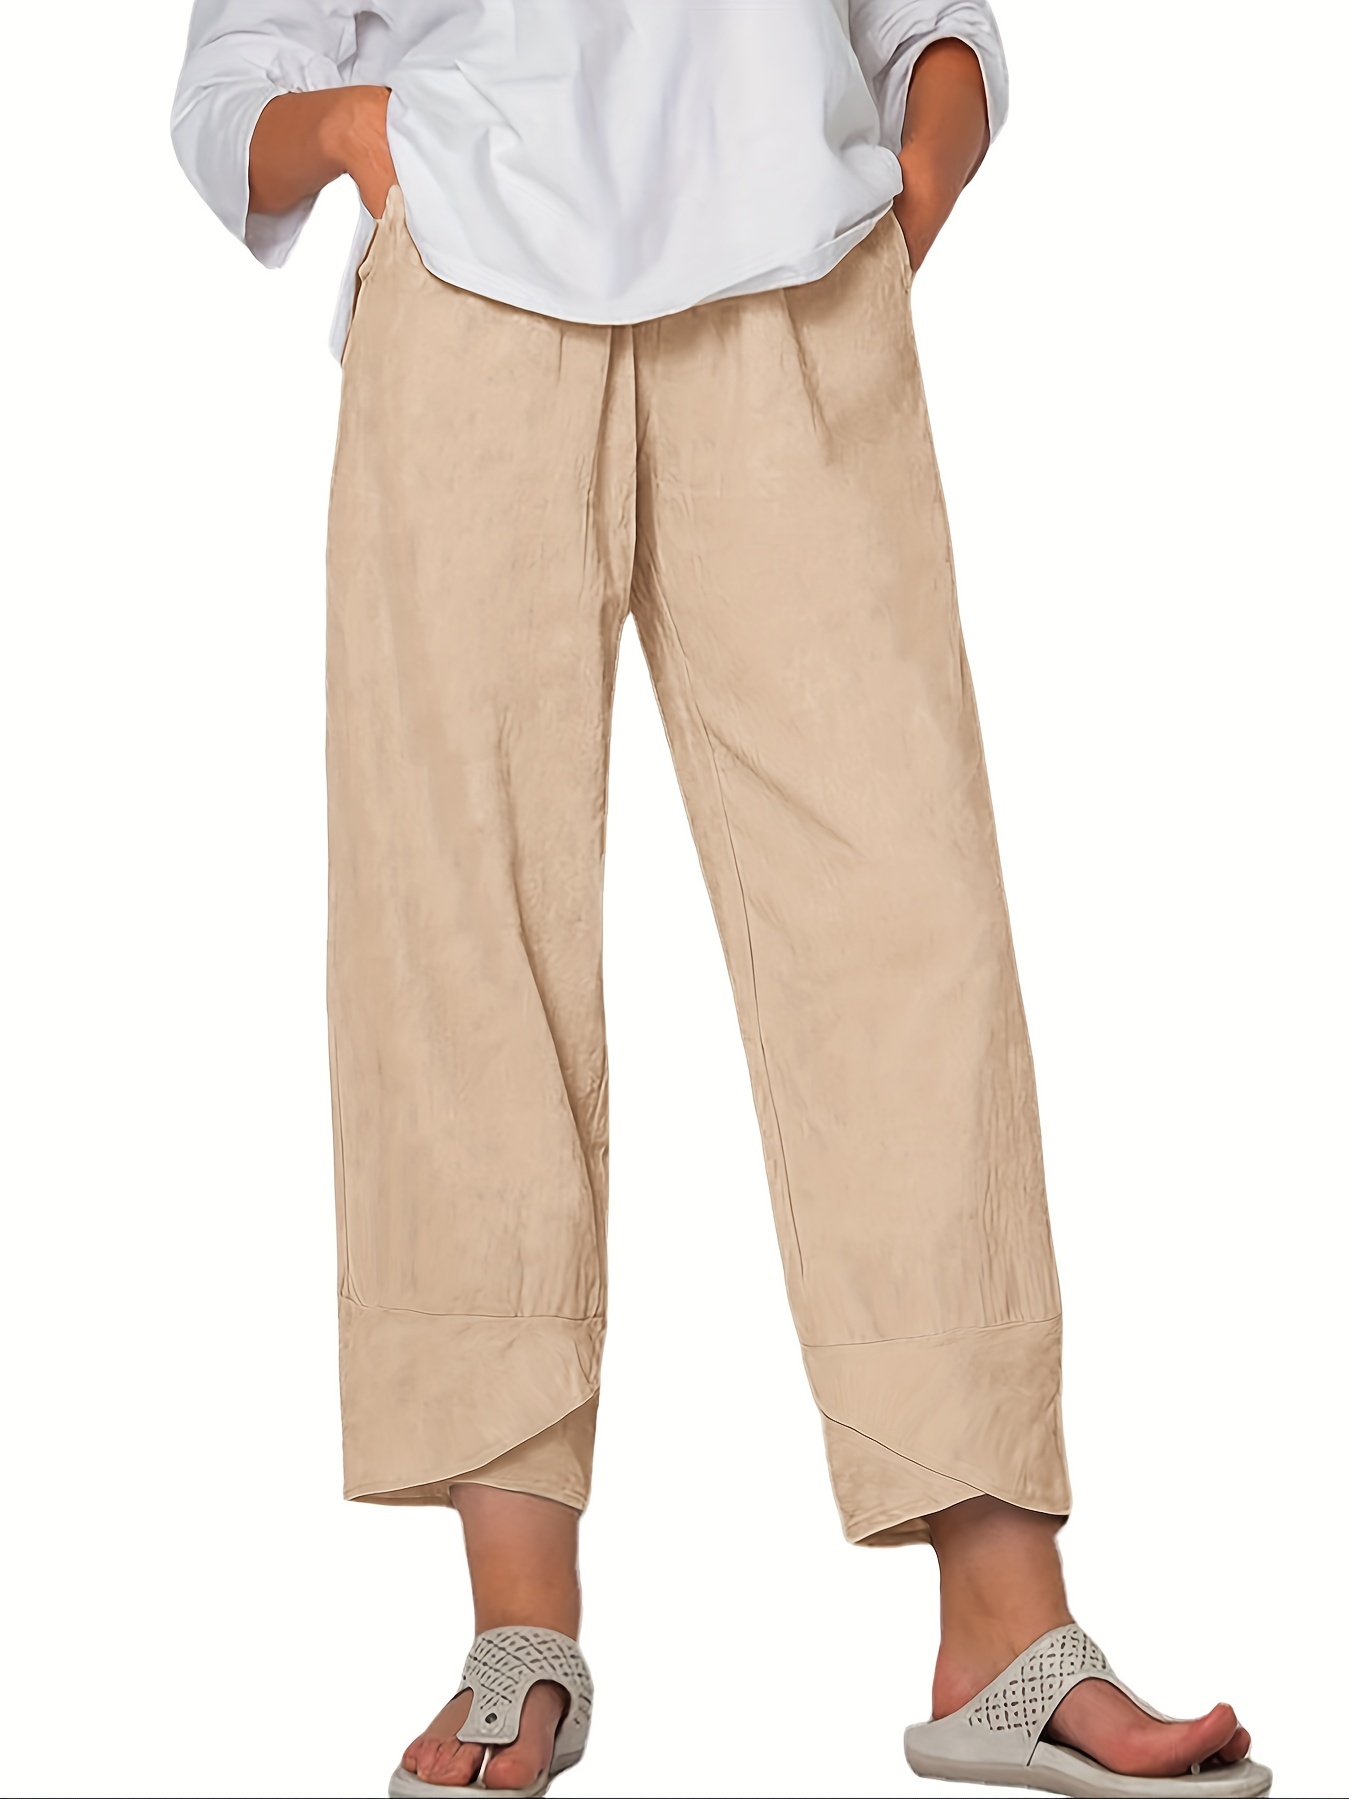 TOPINCN Women Elastic Waist Drawstring Closure Large Pockets Baggy Pants  Casual Trousers for Daily Sports Traveling (S) Beige at  Women's  Clothing store